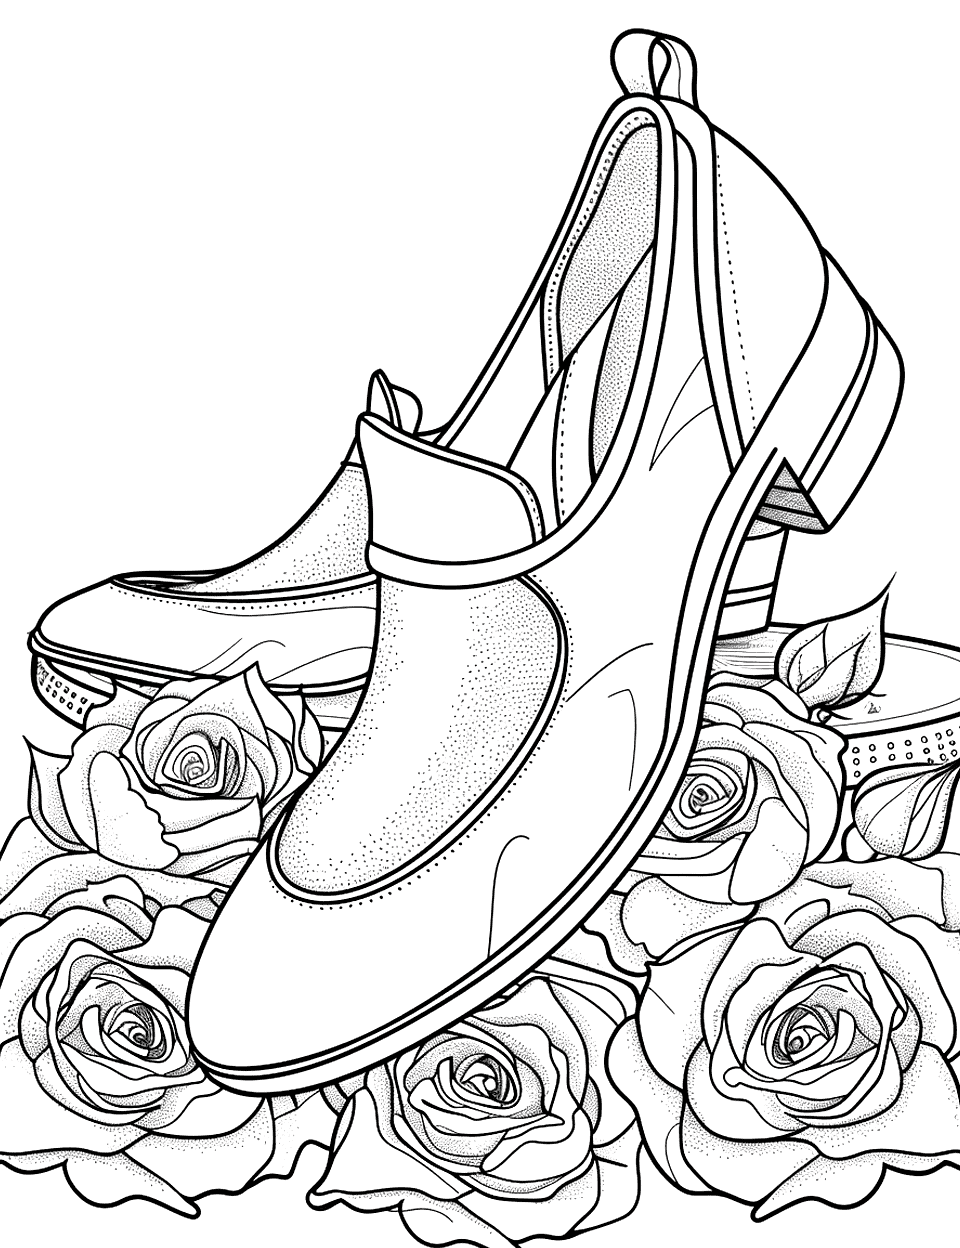 Cinderella's Glass Slipper Shoe Coloring Page - Cinderella’s delicate glass slipper with elegant roses surrounding it.